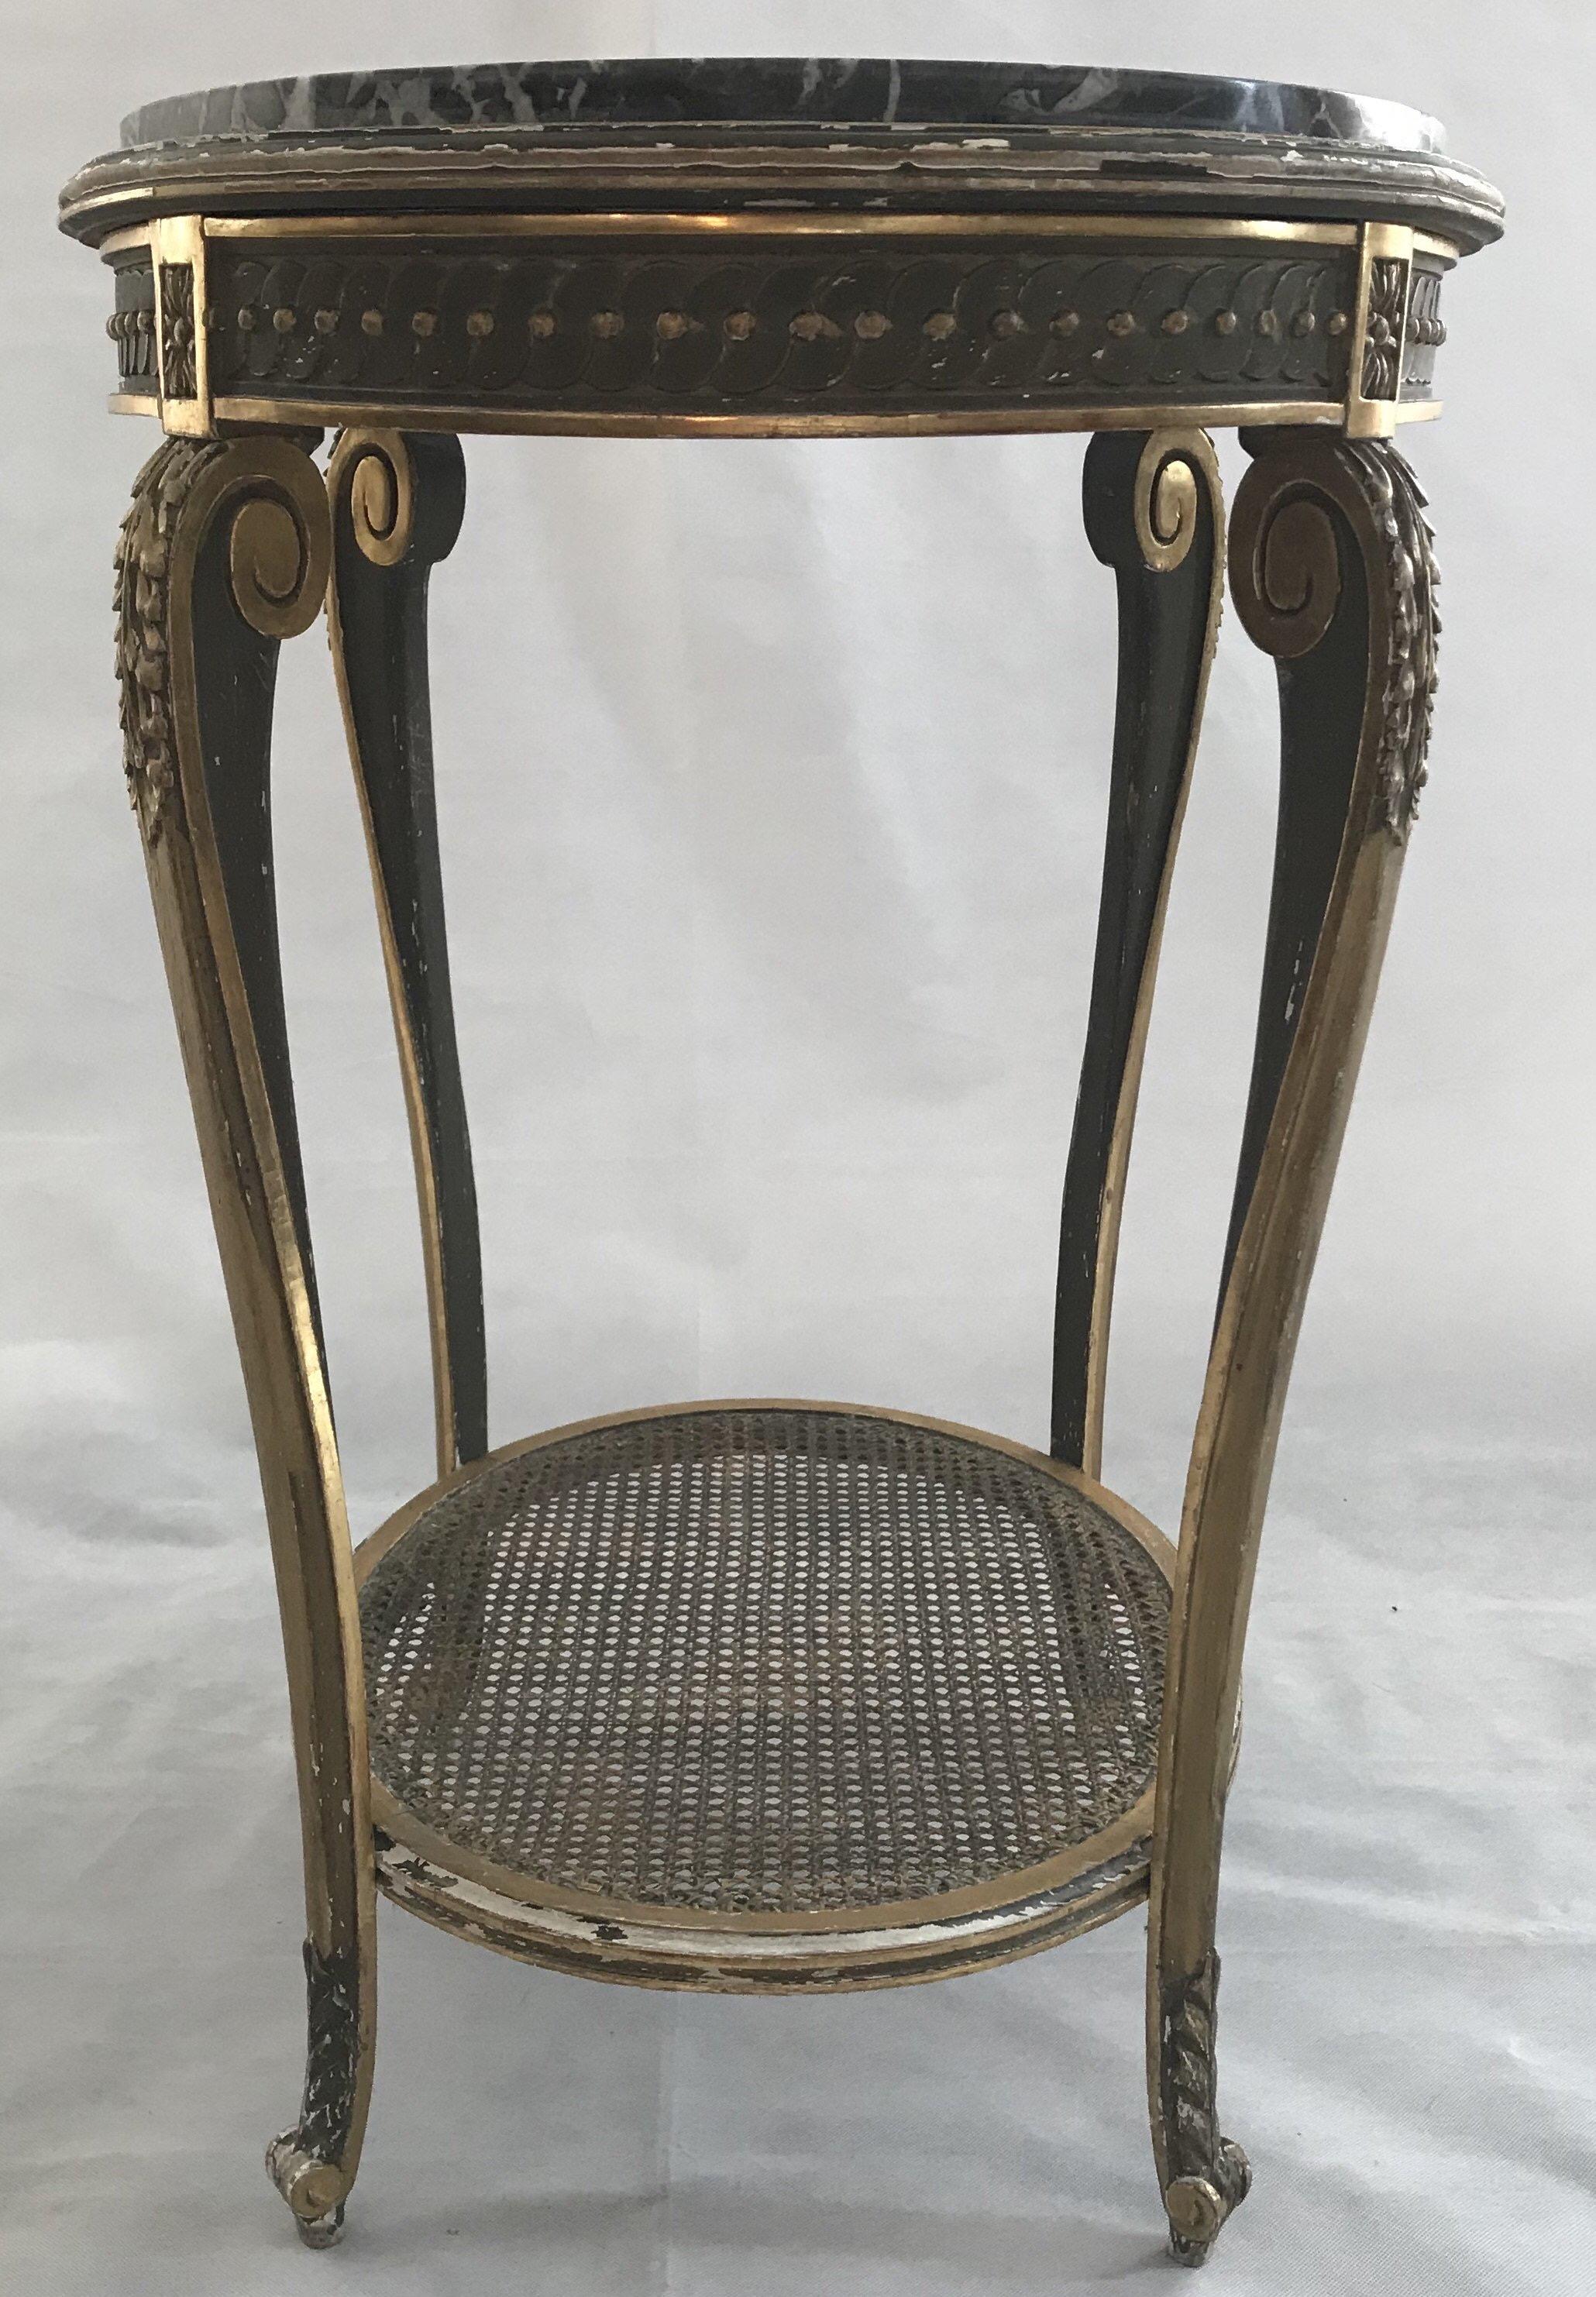 An unusually pretty French antique giltwood oval side or accent table with lively black and white marble top and caned bottom tier.

#2334.